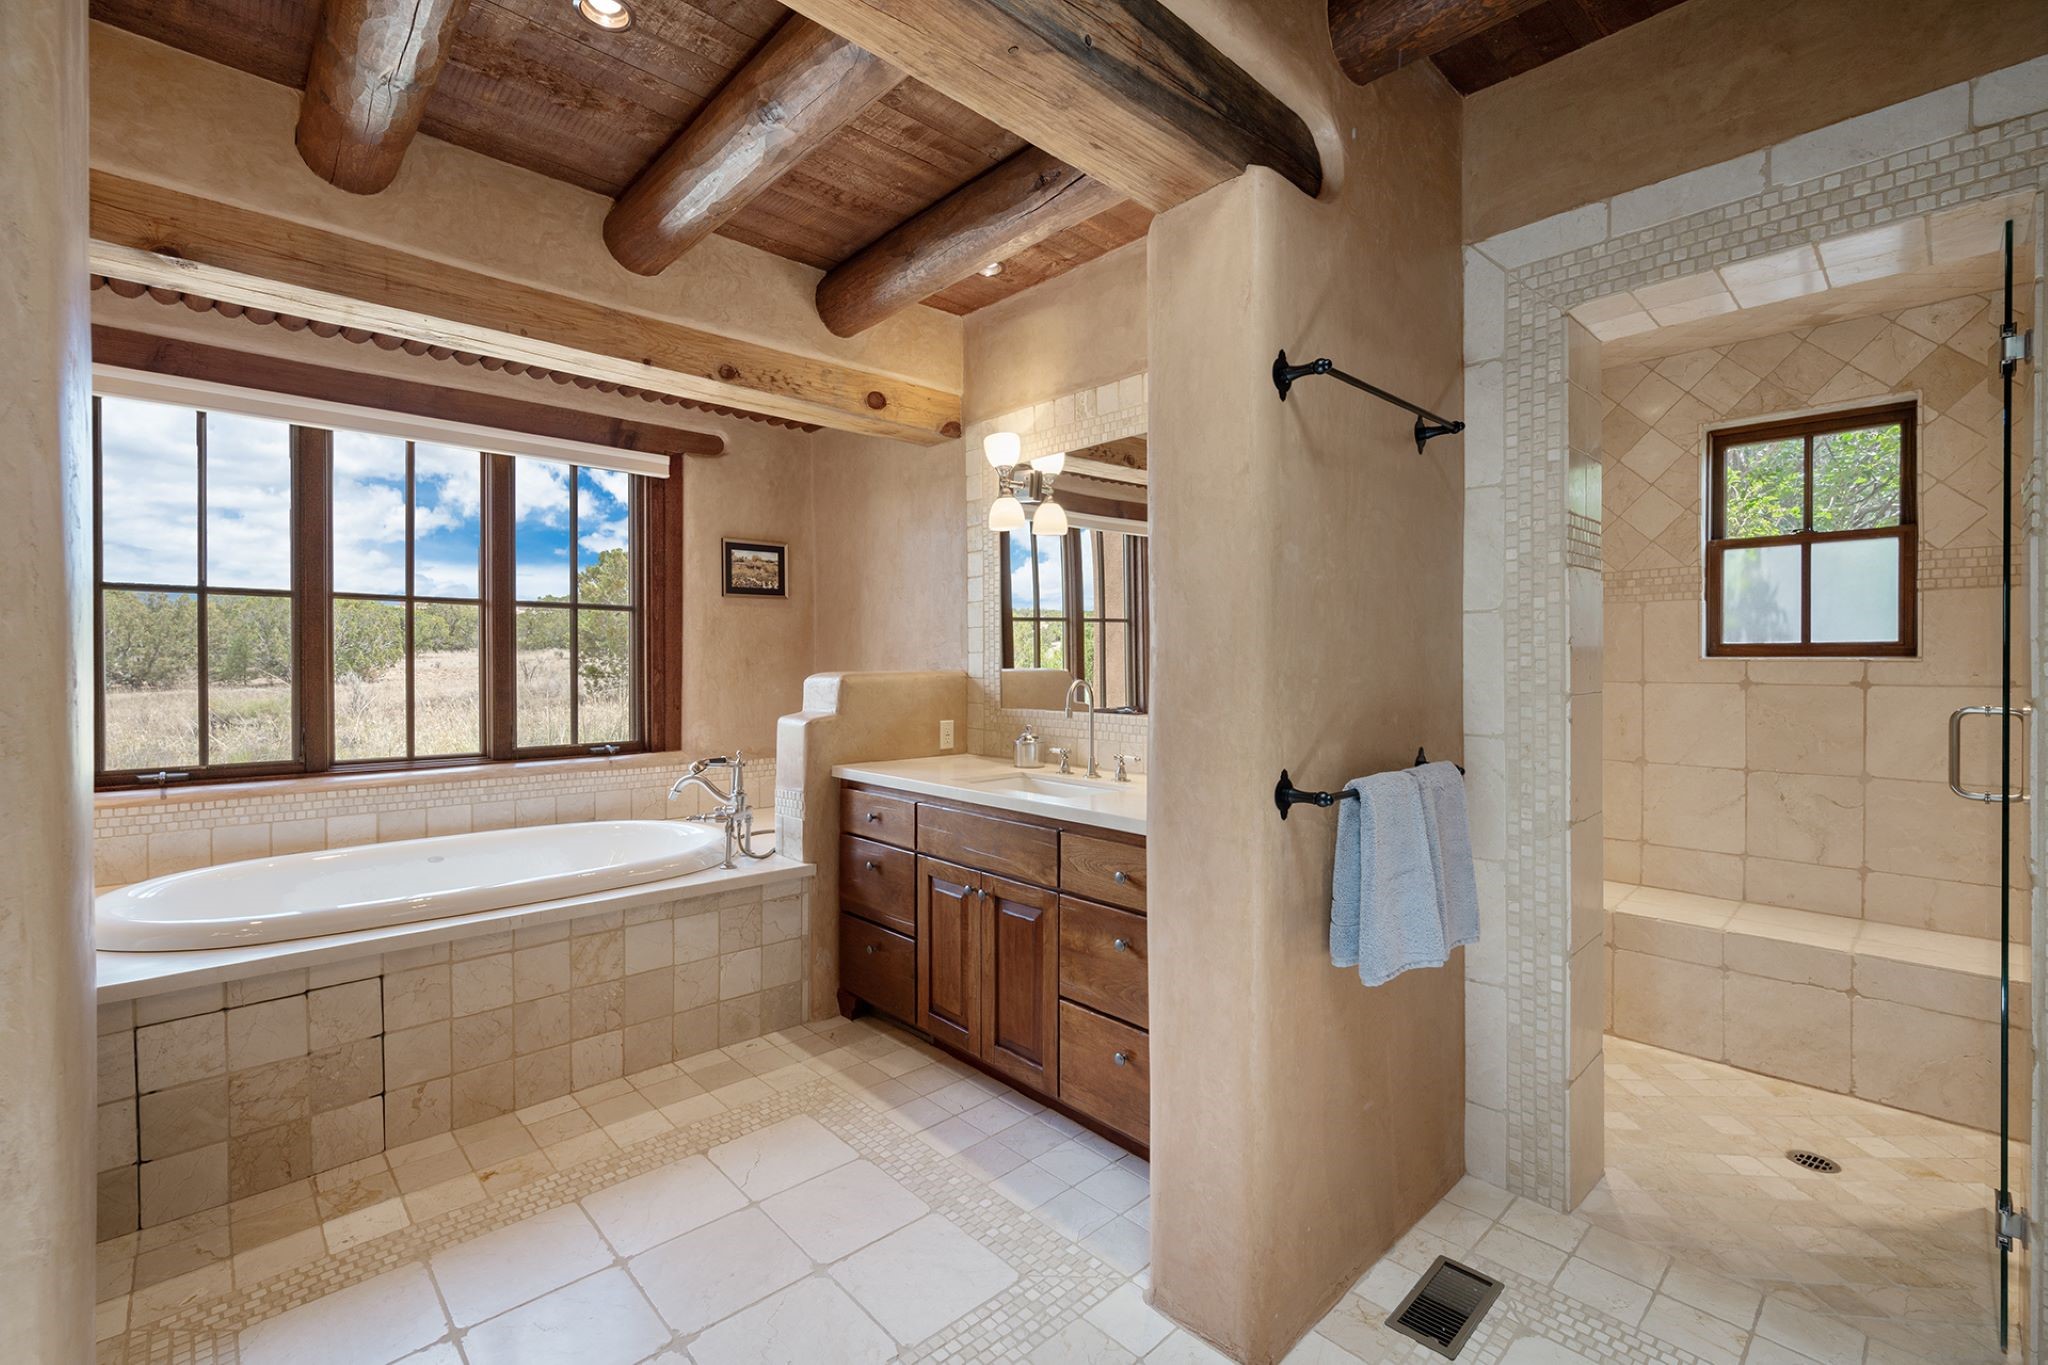 Jetted tub in master bathroom. Two separated vanities. Limestone countertops and floors.